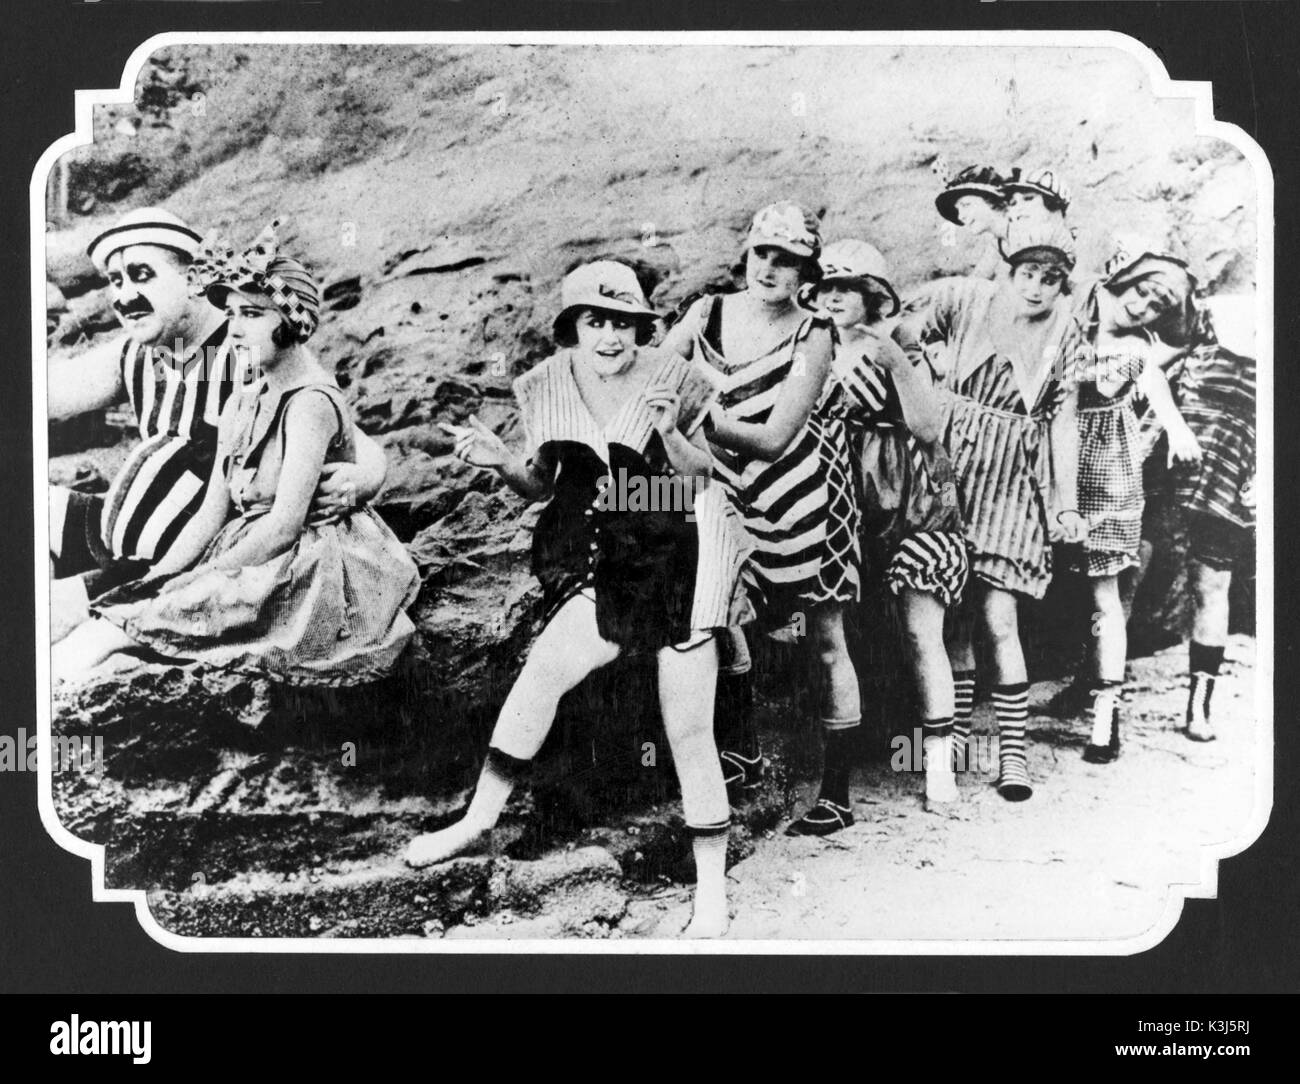 UNIDENTIFIED 1910s MACK SENNETT Comedy MACK SWAIN with his arm round GLORIA SWANSON with the MACK SENNET BATHING BEAUTIES Stock Photo